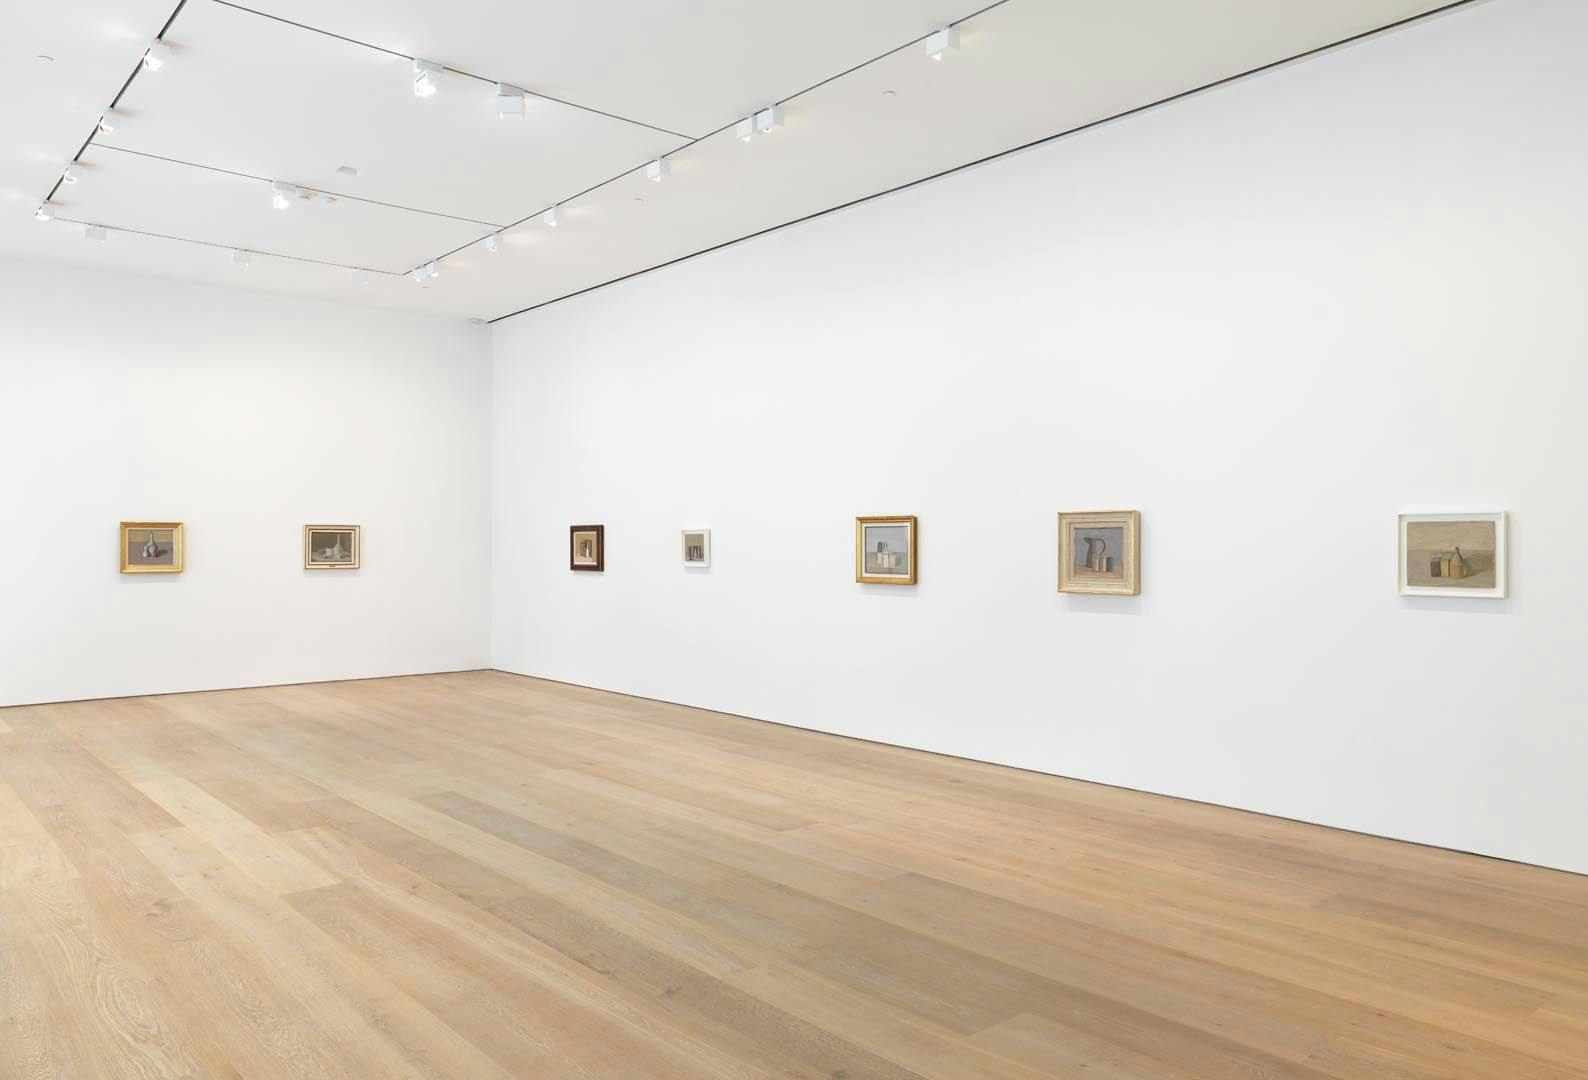 Installation view of the exhibition Giorgio Morandi at David Zwirner in New York, dated 2015.